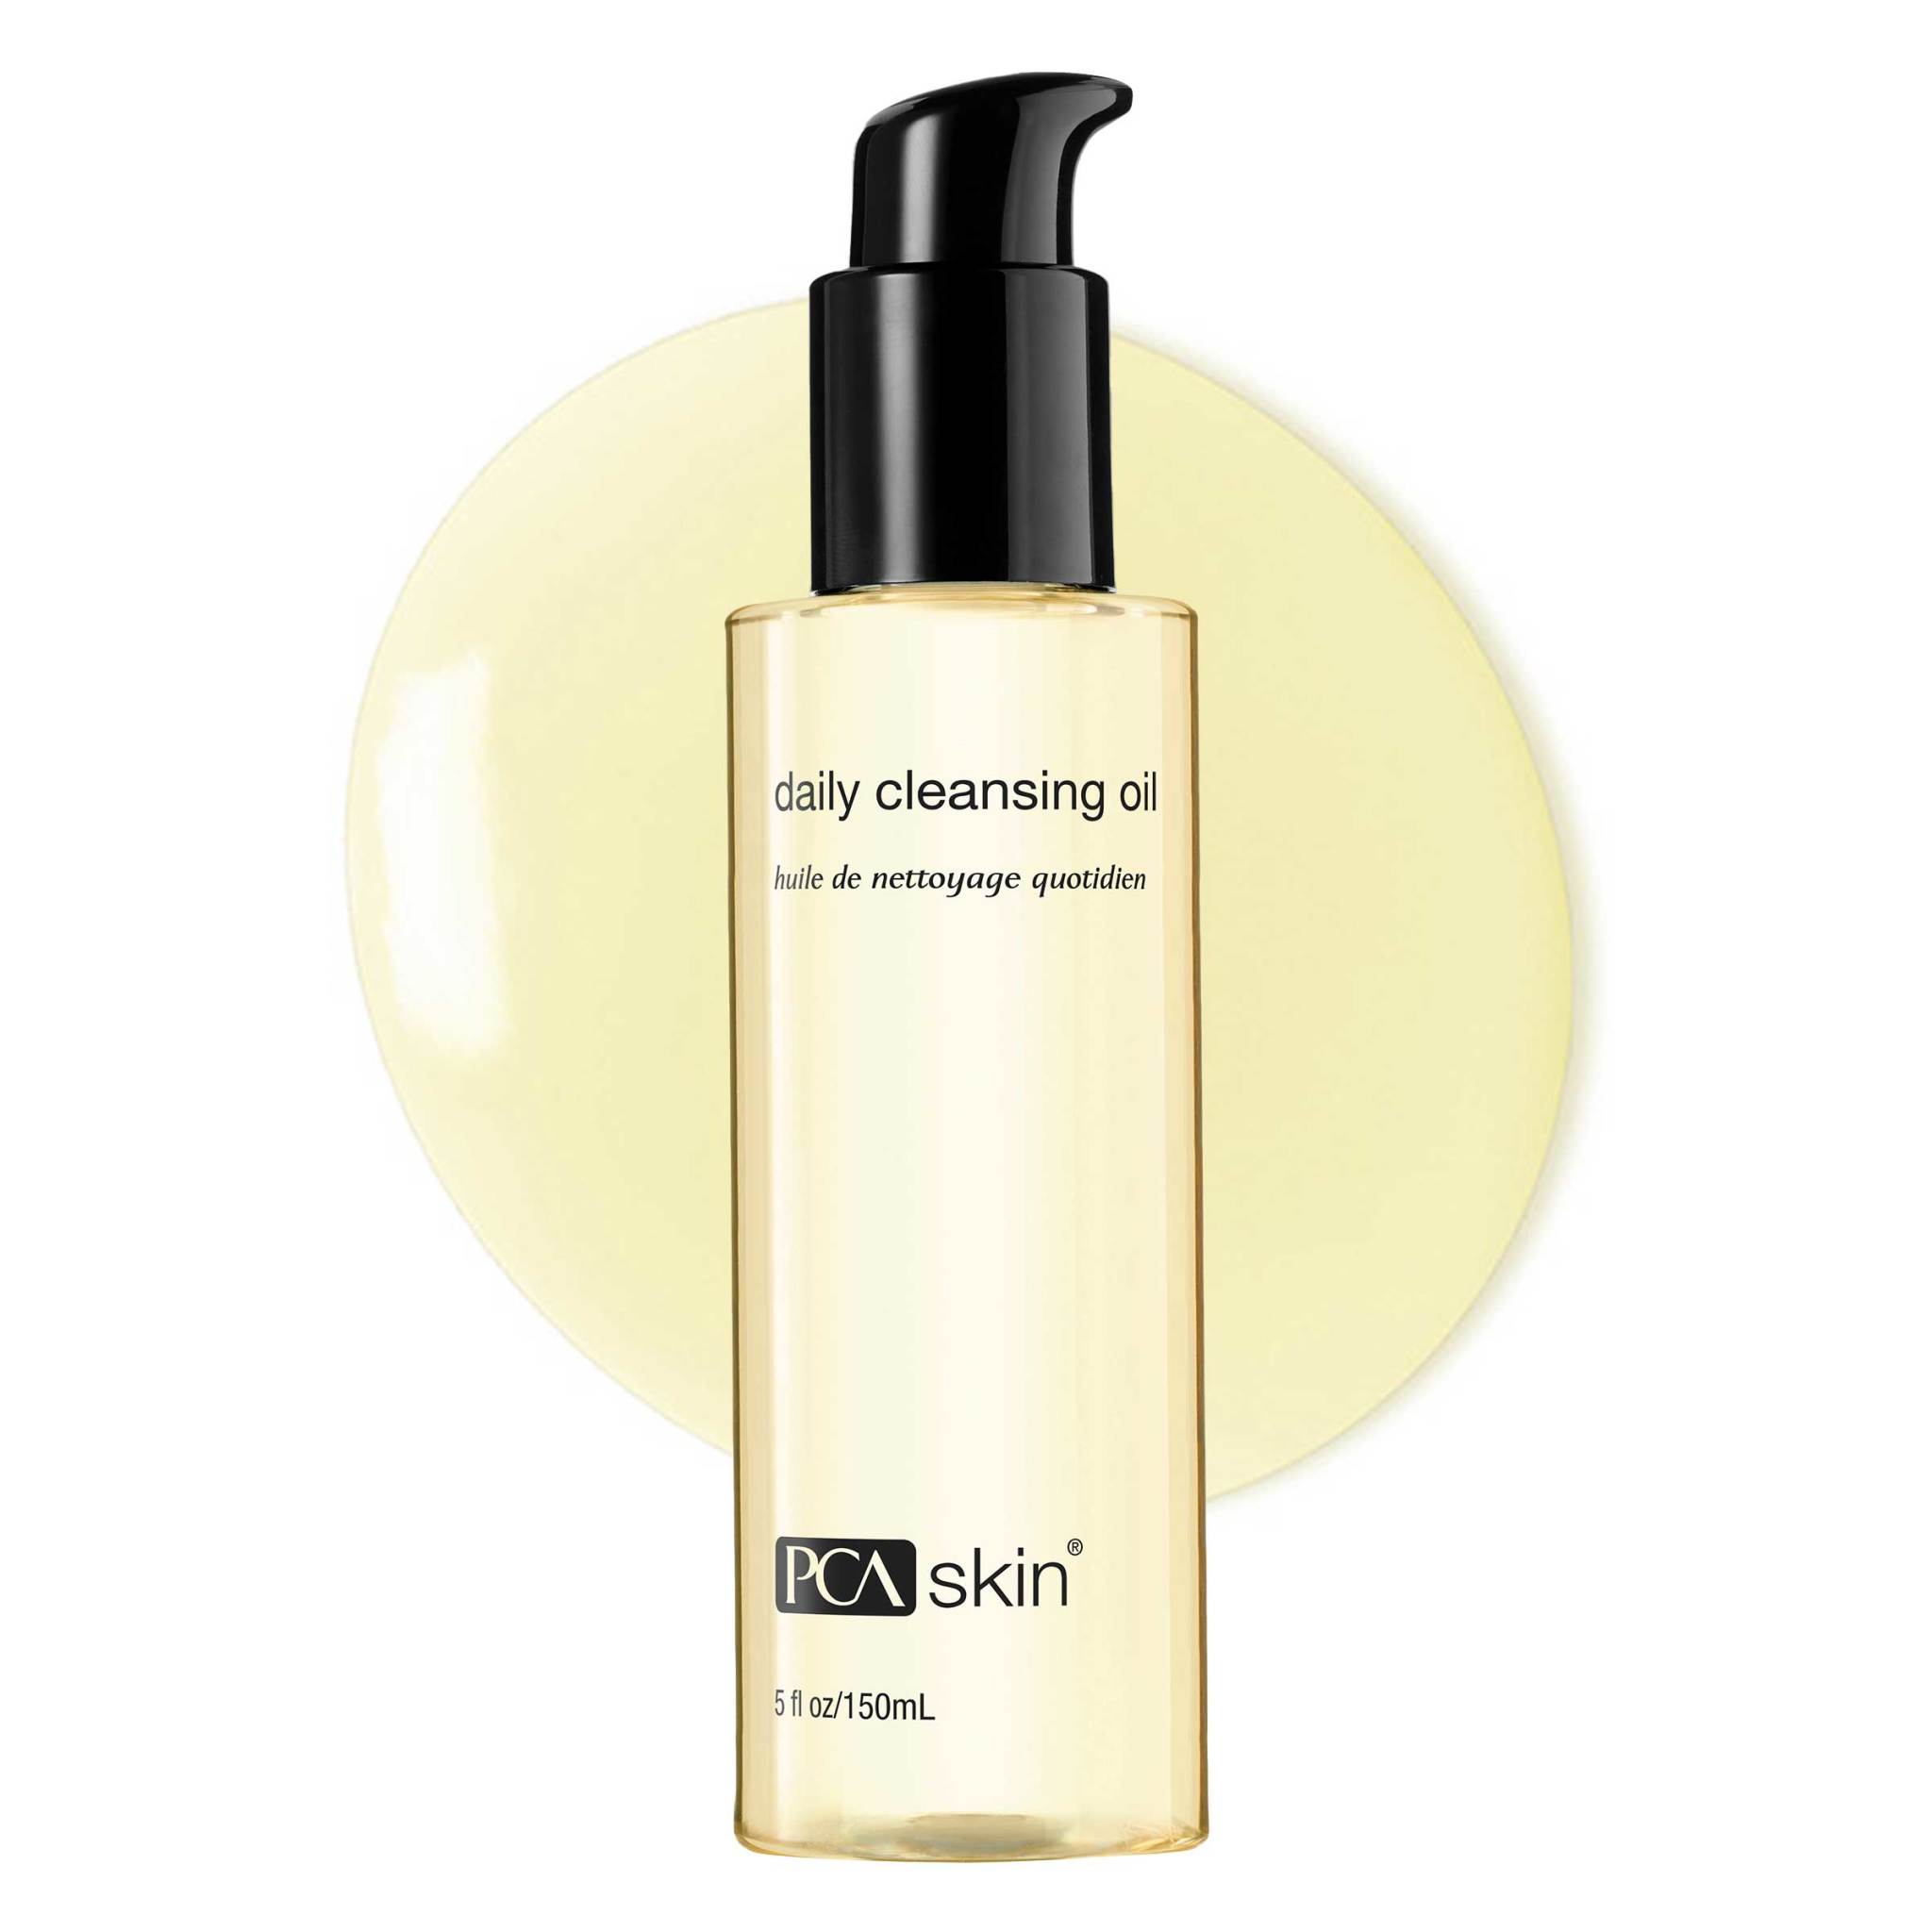 PCA Skin Daily Cleansing Oil main image.